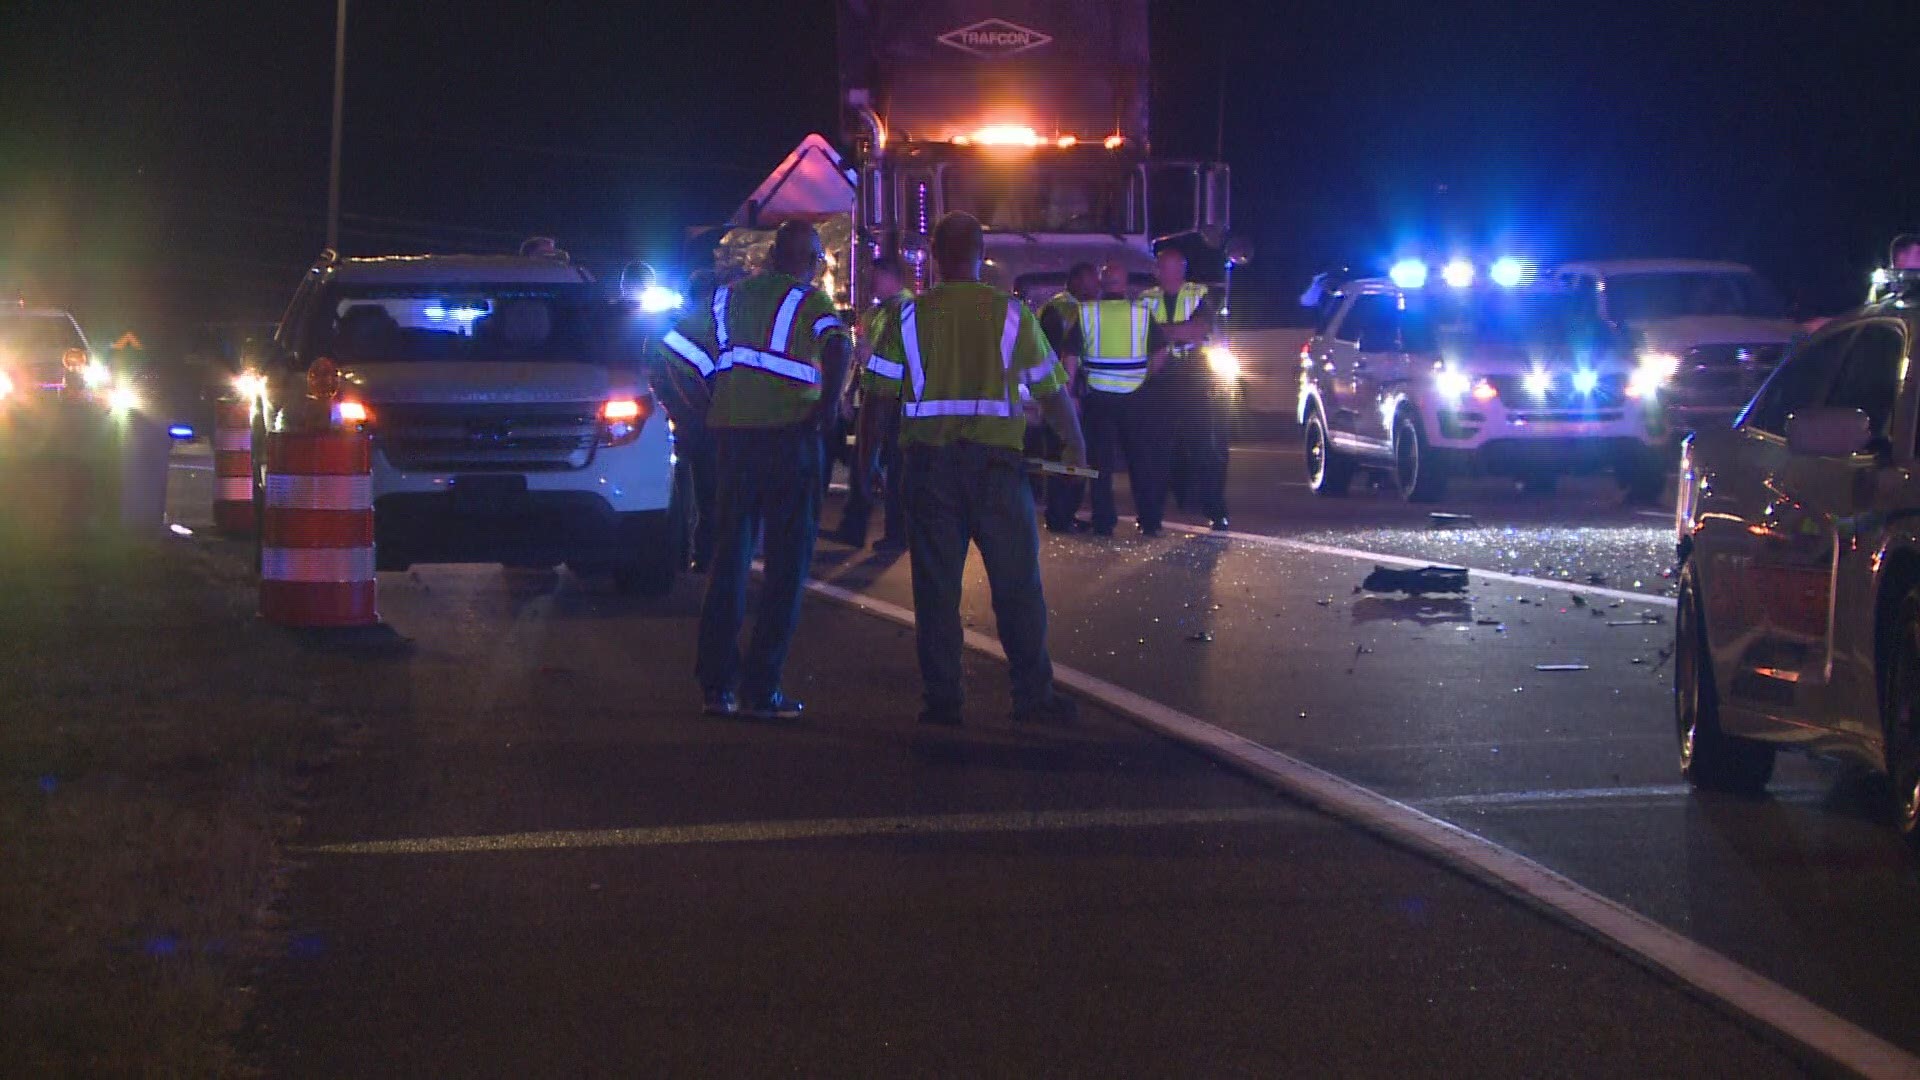 Two others were hurt in the crash, but the extent of their injuries are unknown at this time.